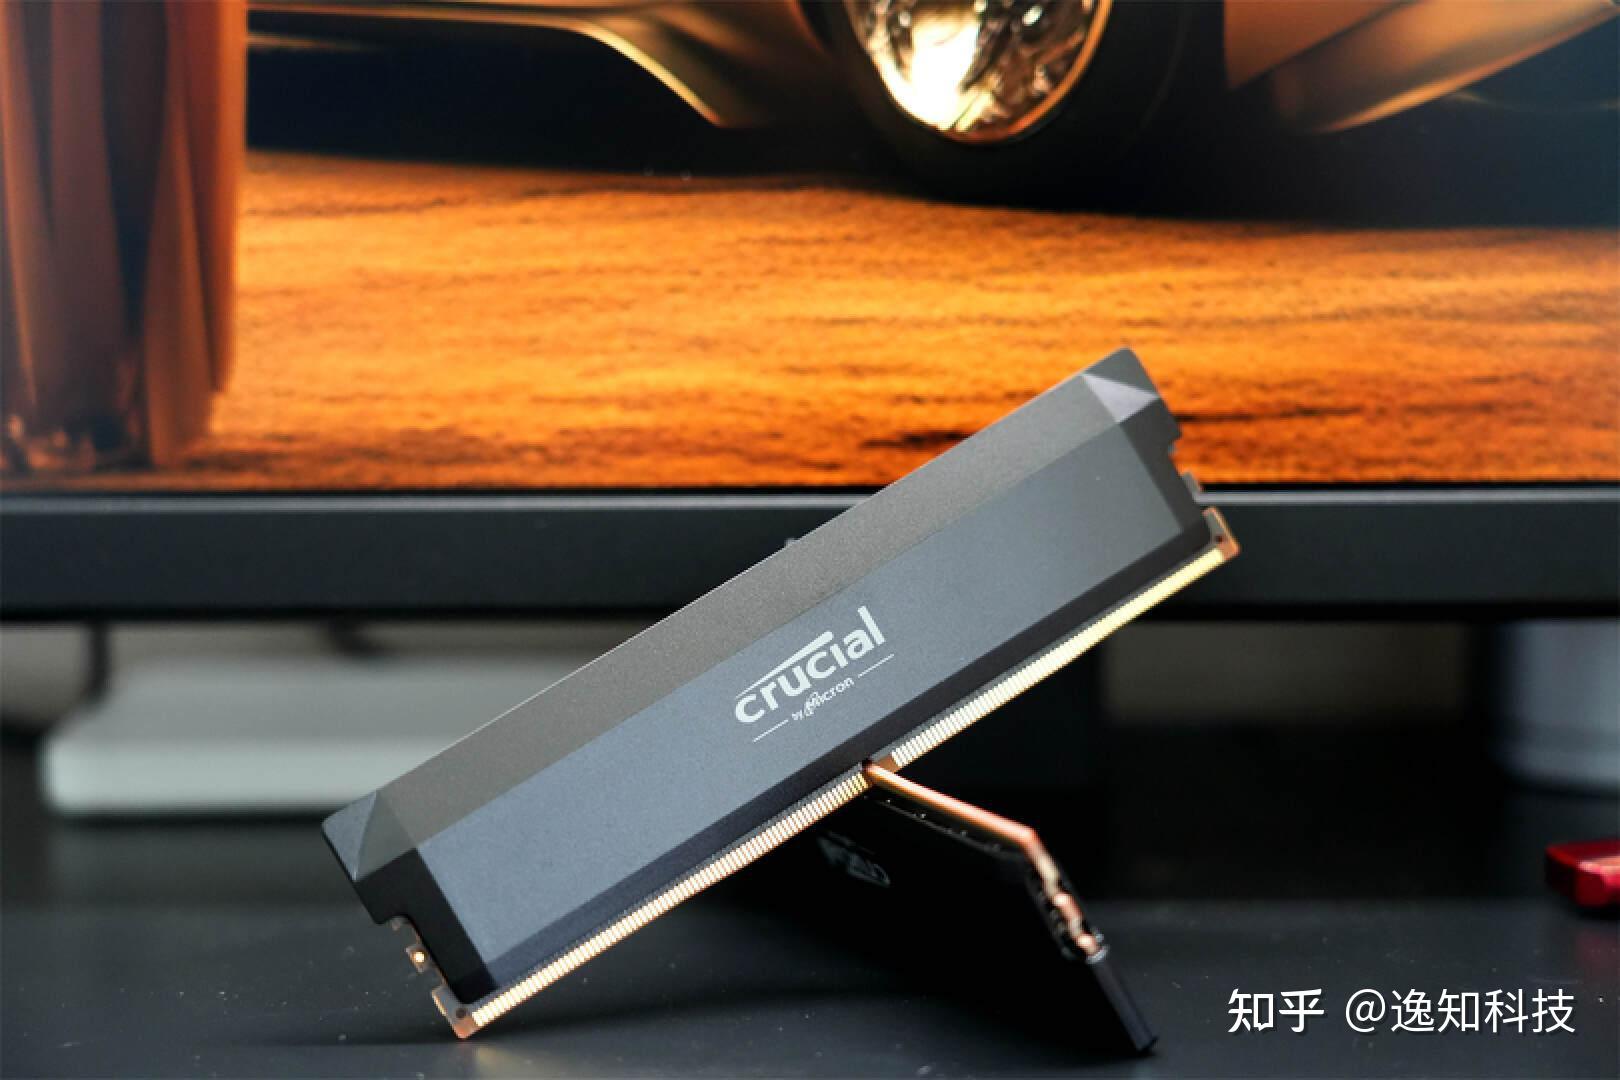 surface book ddr4 Surface Book DDR4：性能巅峰，续航杠杠的  第7张